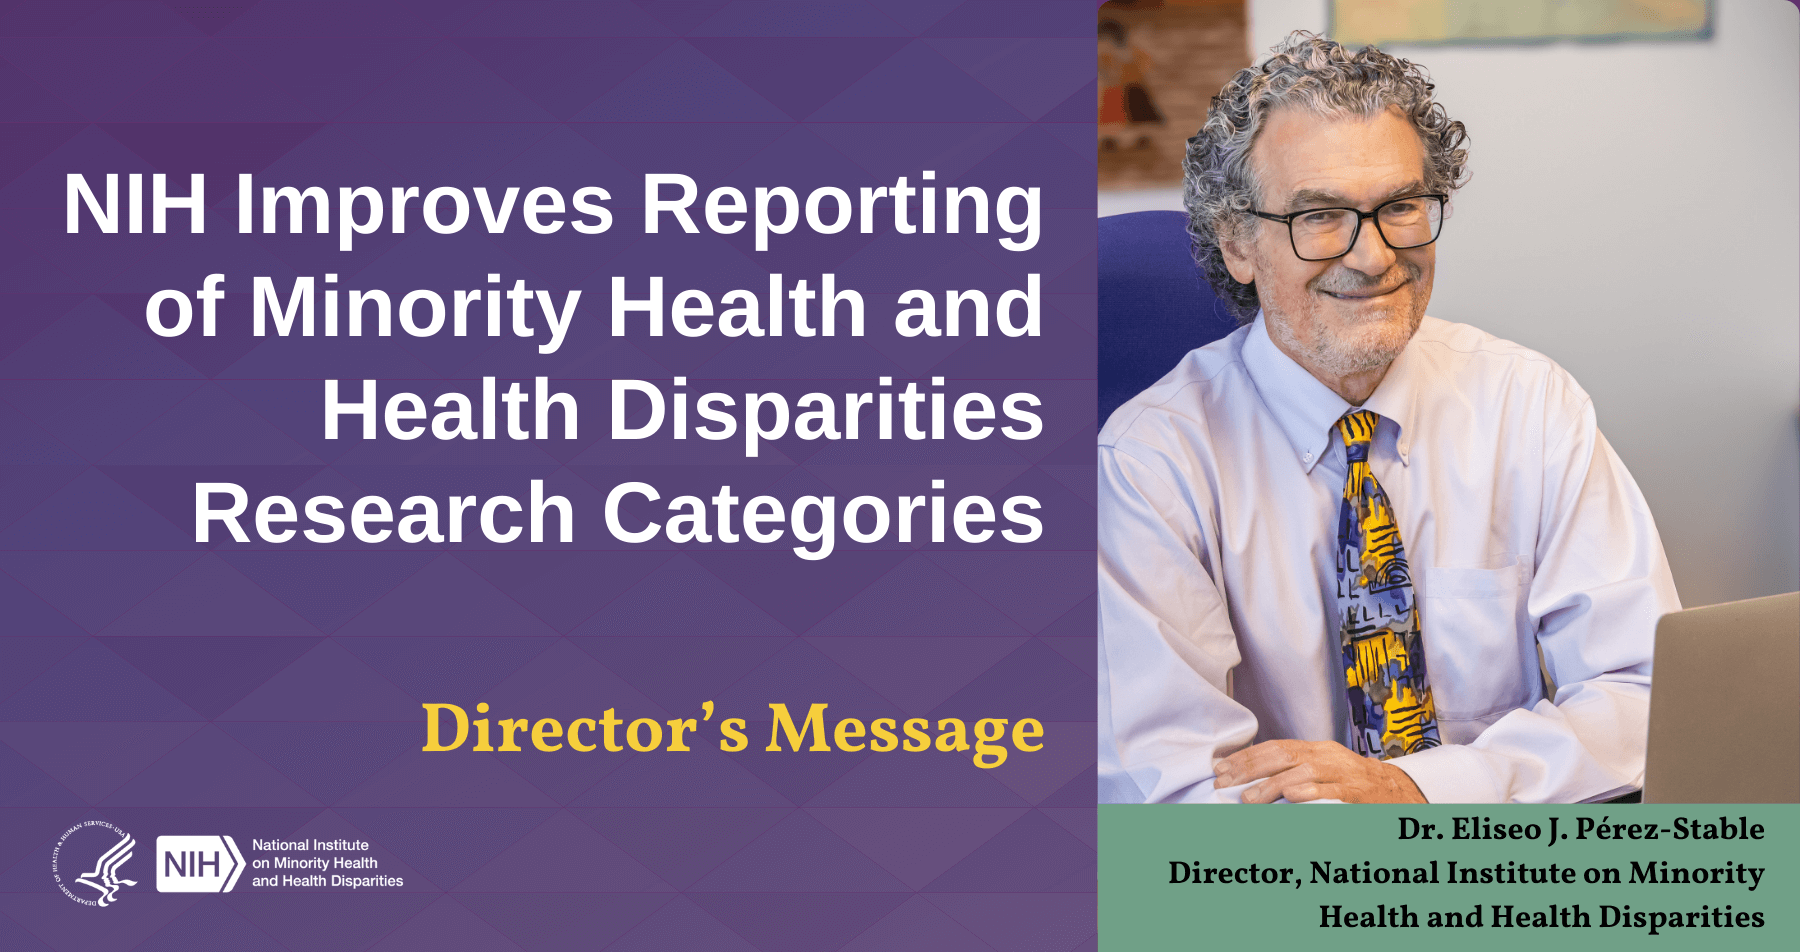 Director’s Message: NIH Improves Reporting of Minority Health and Health Disparities Research Categories. Photo: NIMHD Director Dr. Eliseo J. Pérez-Stable